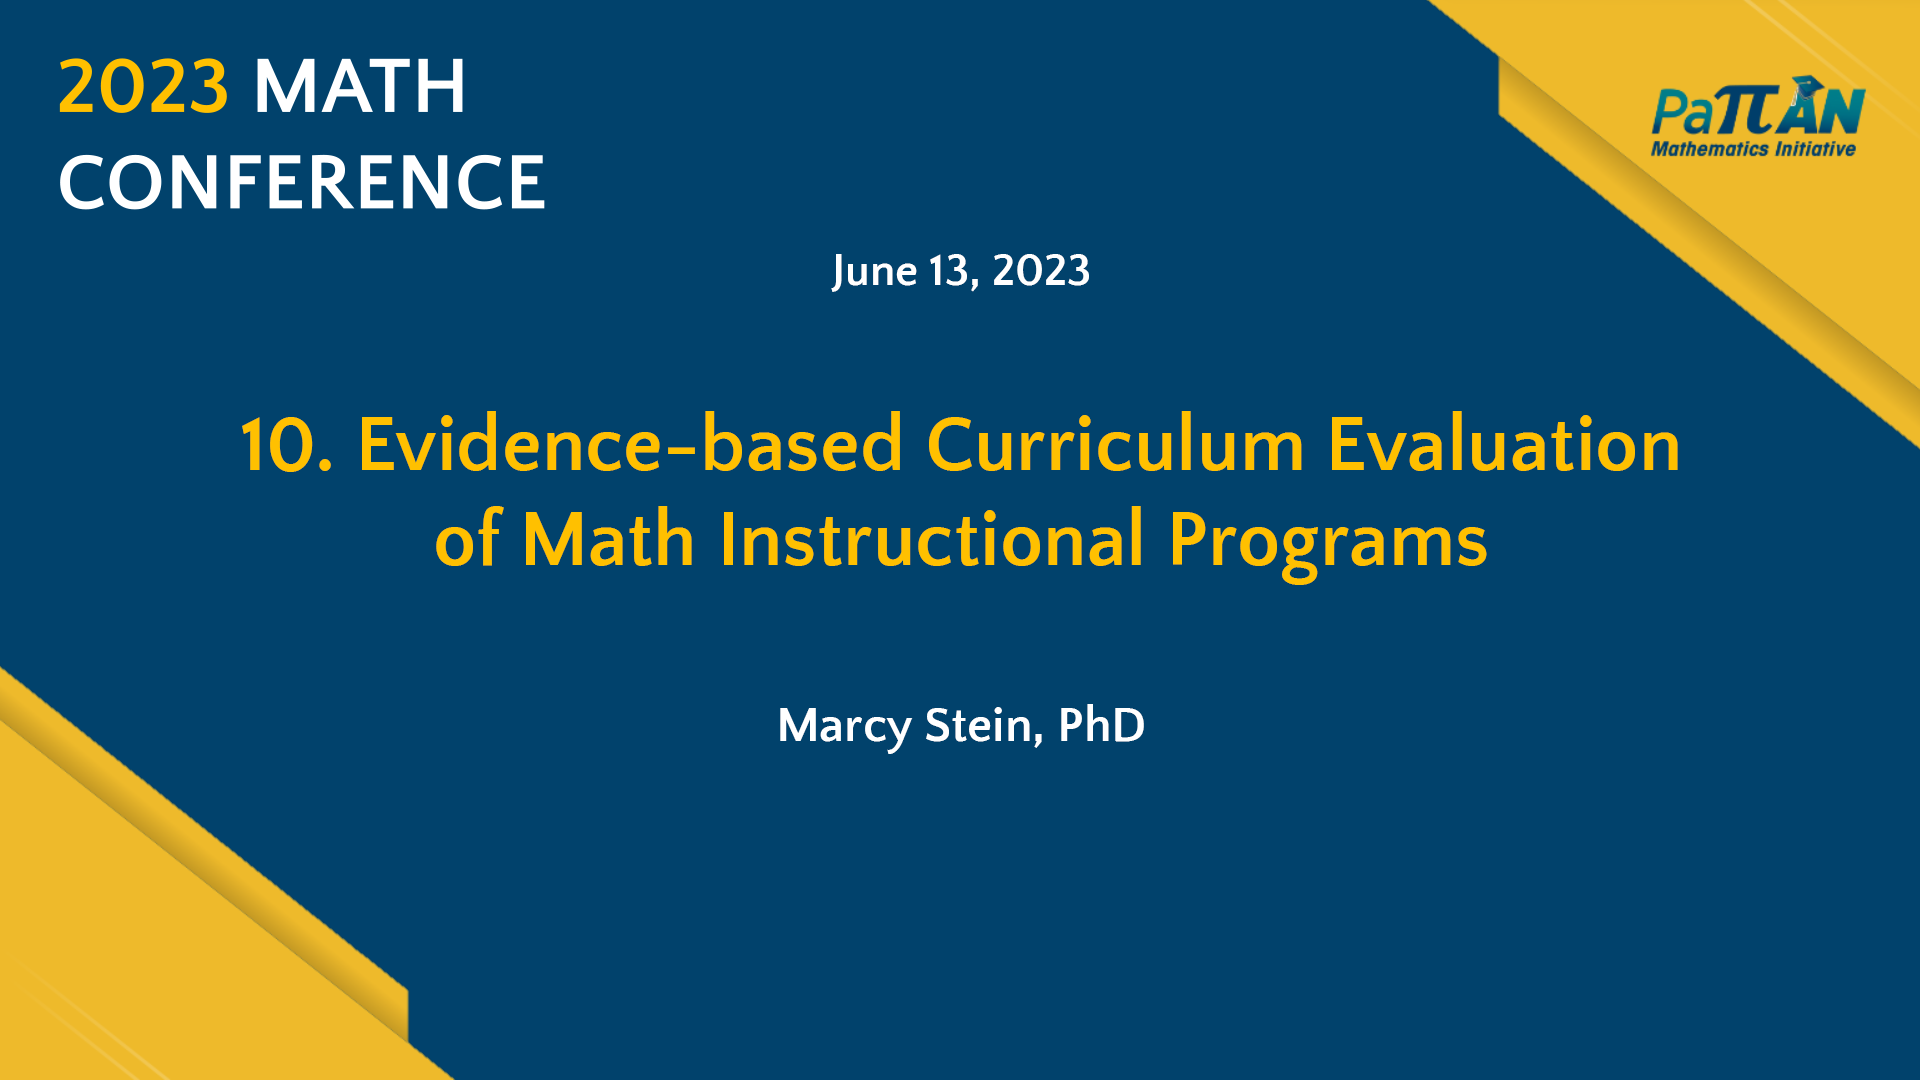 10. Evidence-based Curriculum Evaluation of Math Instructional Programs | Math Conference 2023